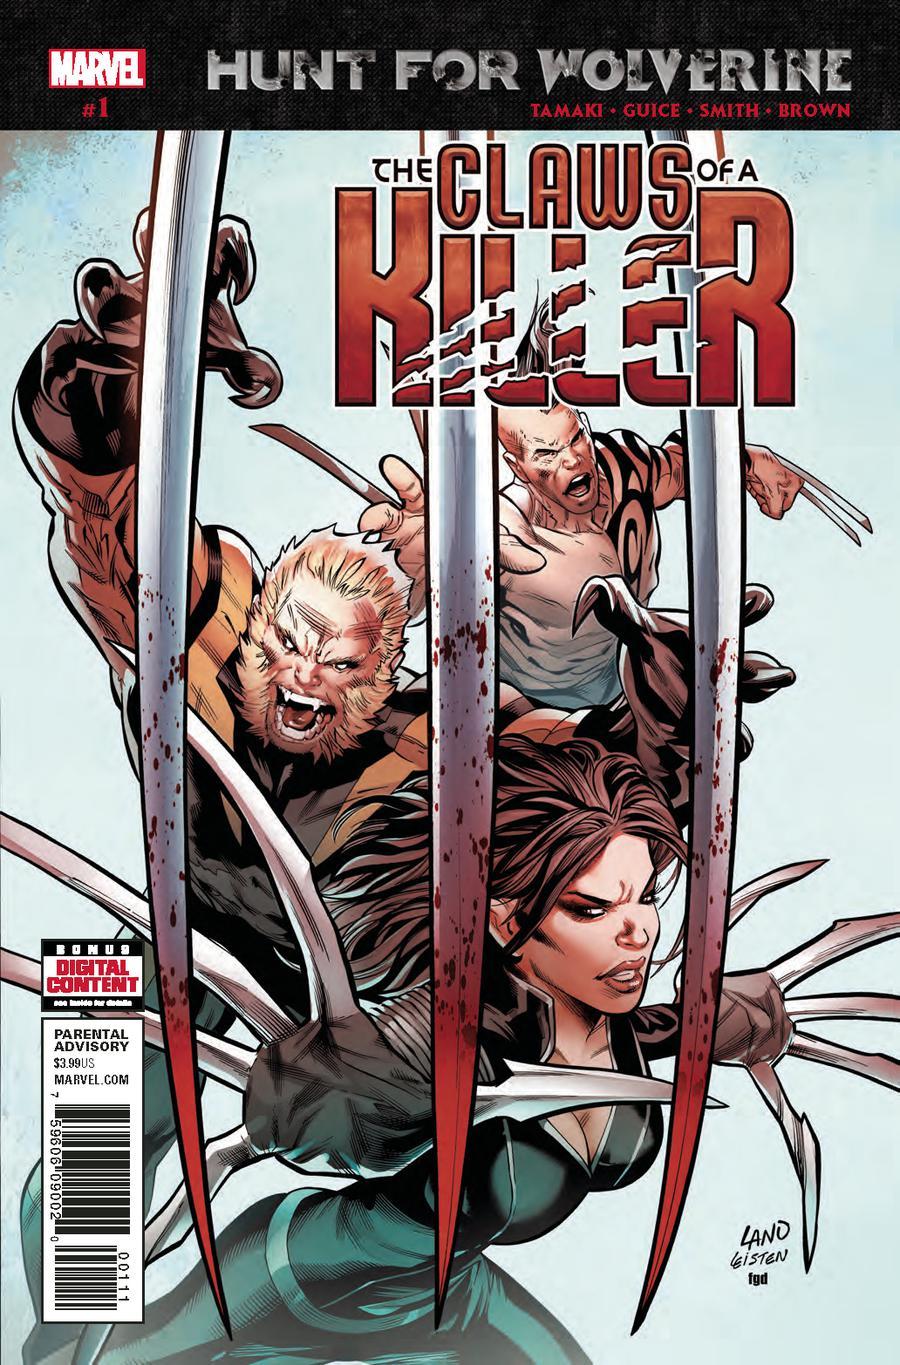 Hunt For Wolverine Claws Of A Killer Vol. 1 #1